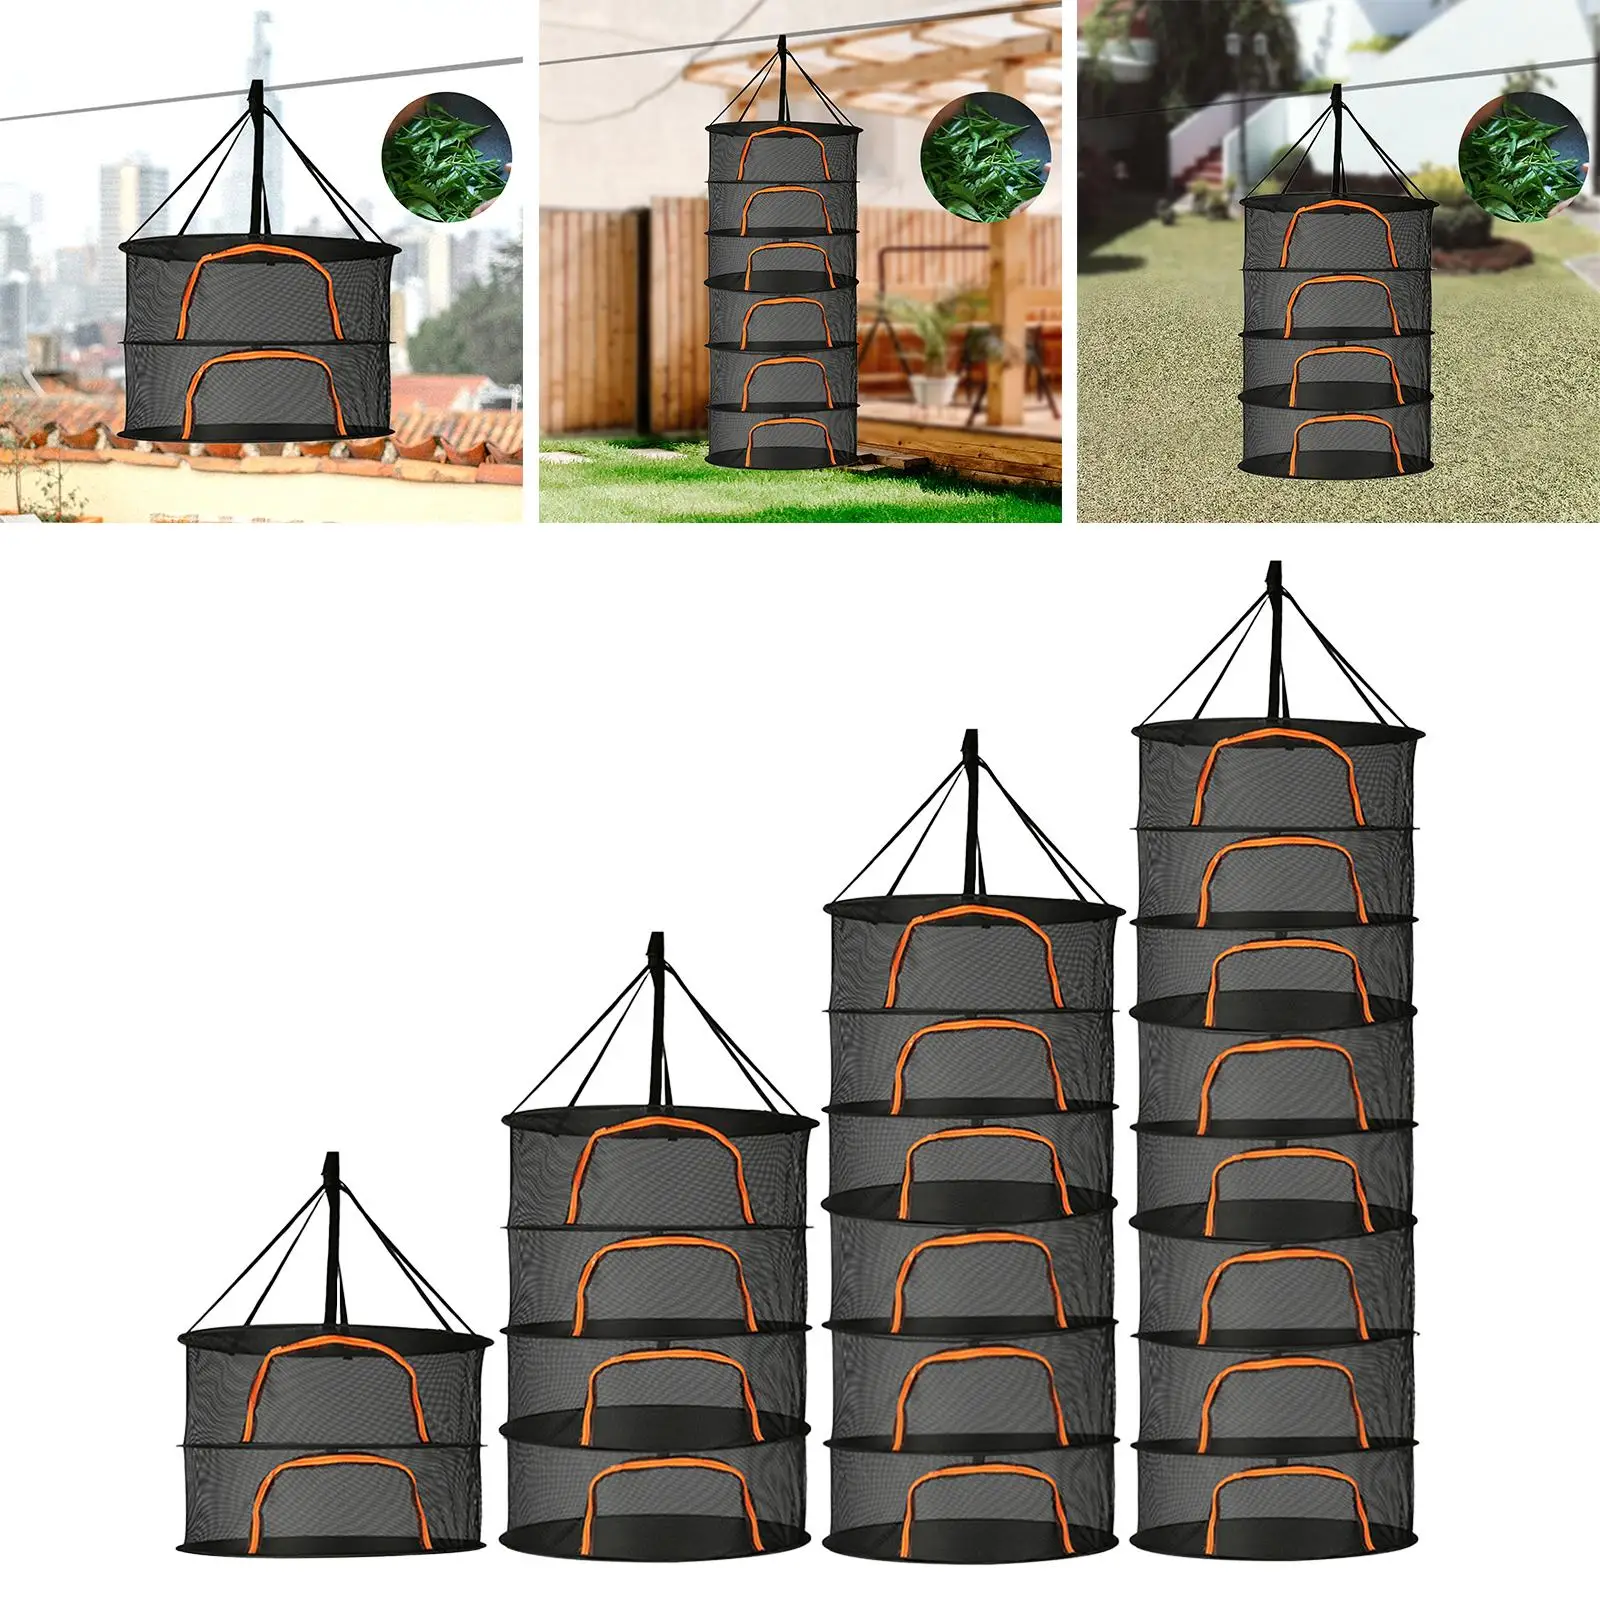 Plants Drying Rack Drying Mesh Zipper Opening/ Hanging Drying Fish Net Hanging Mesh Dryer for Clothes/ Fruits/ Vegetables